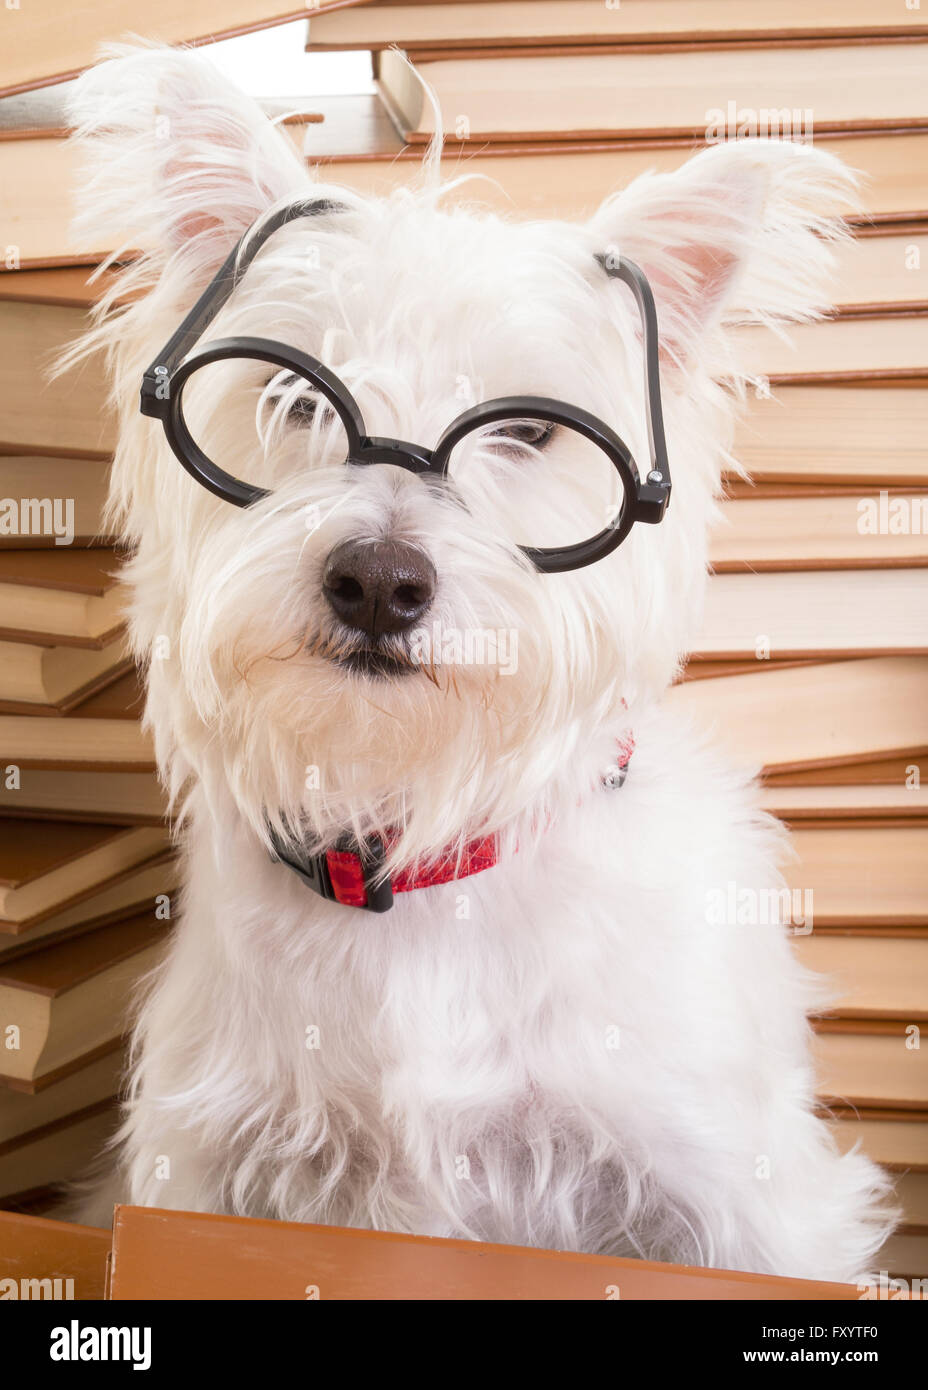 A small white dog wearing glasses in front of a stack of books. Stock Photo